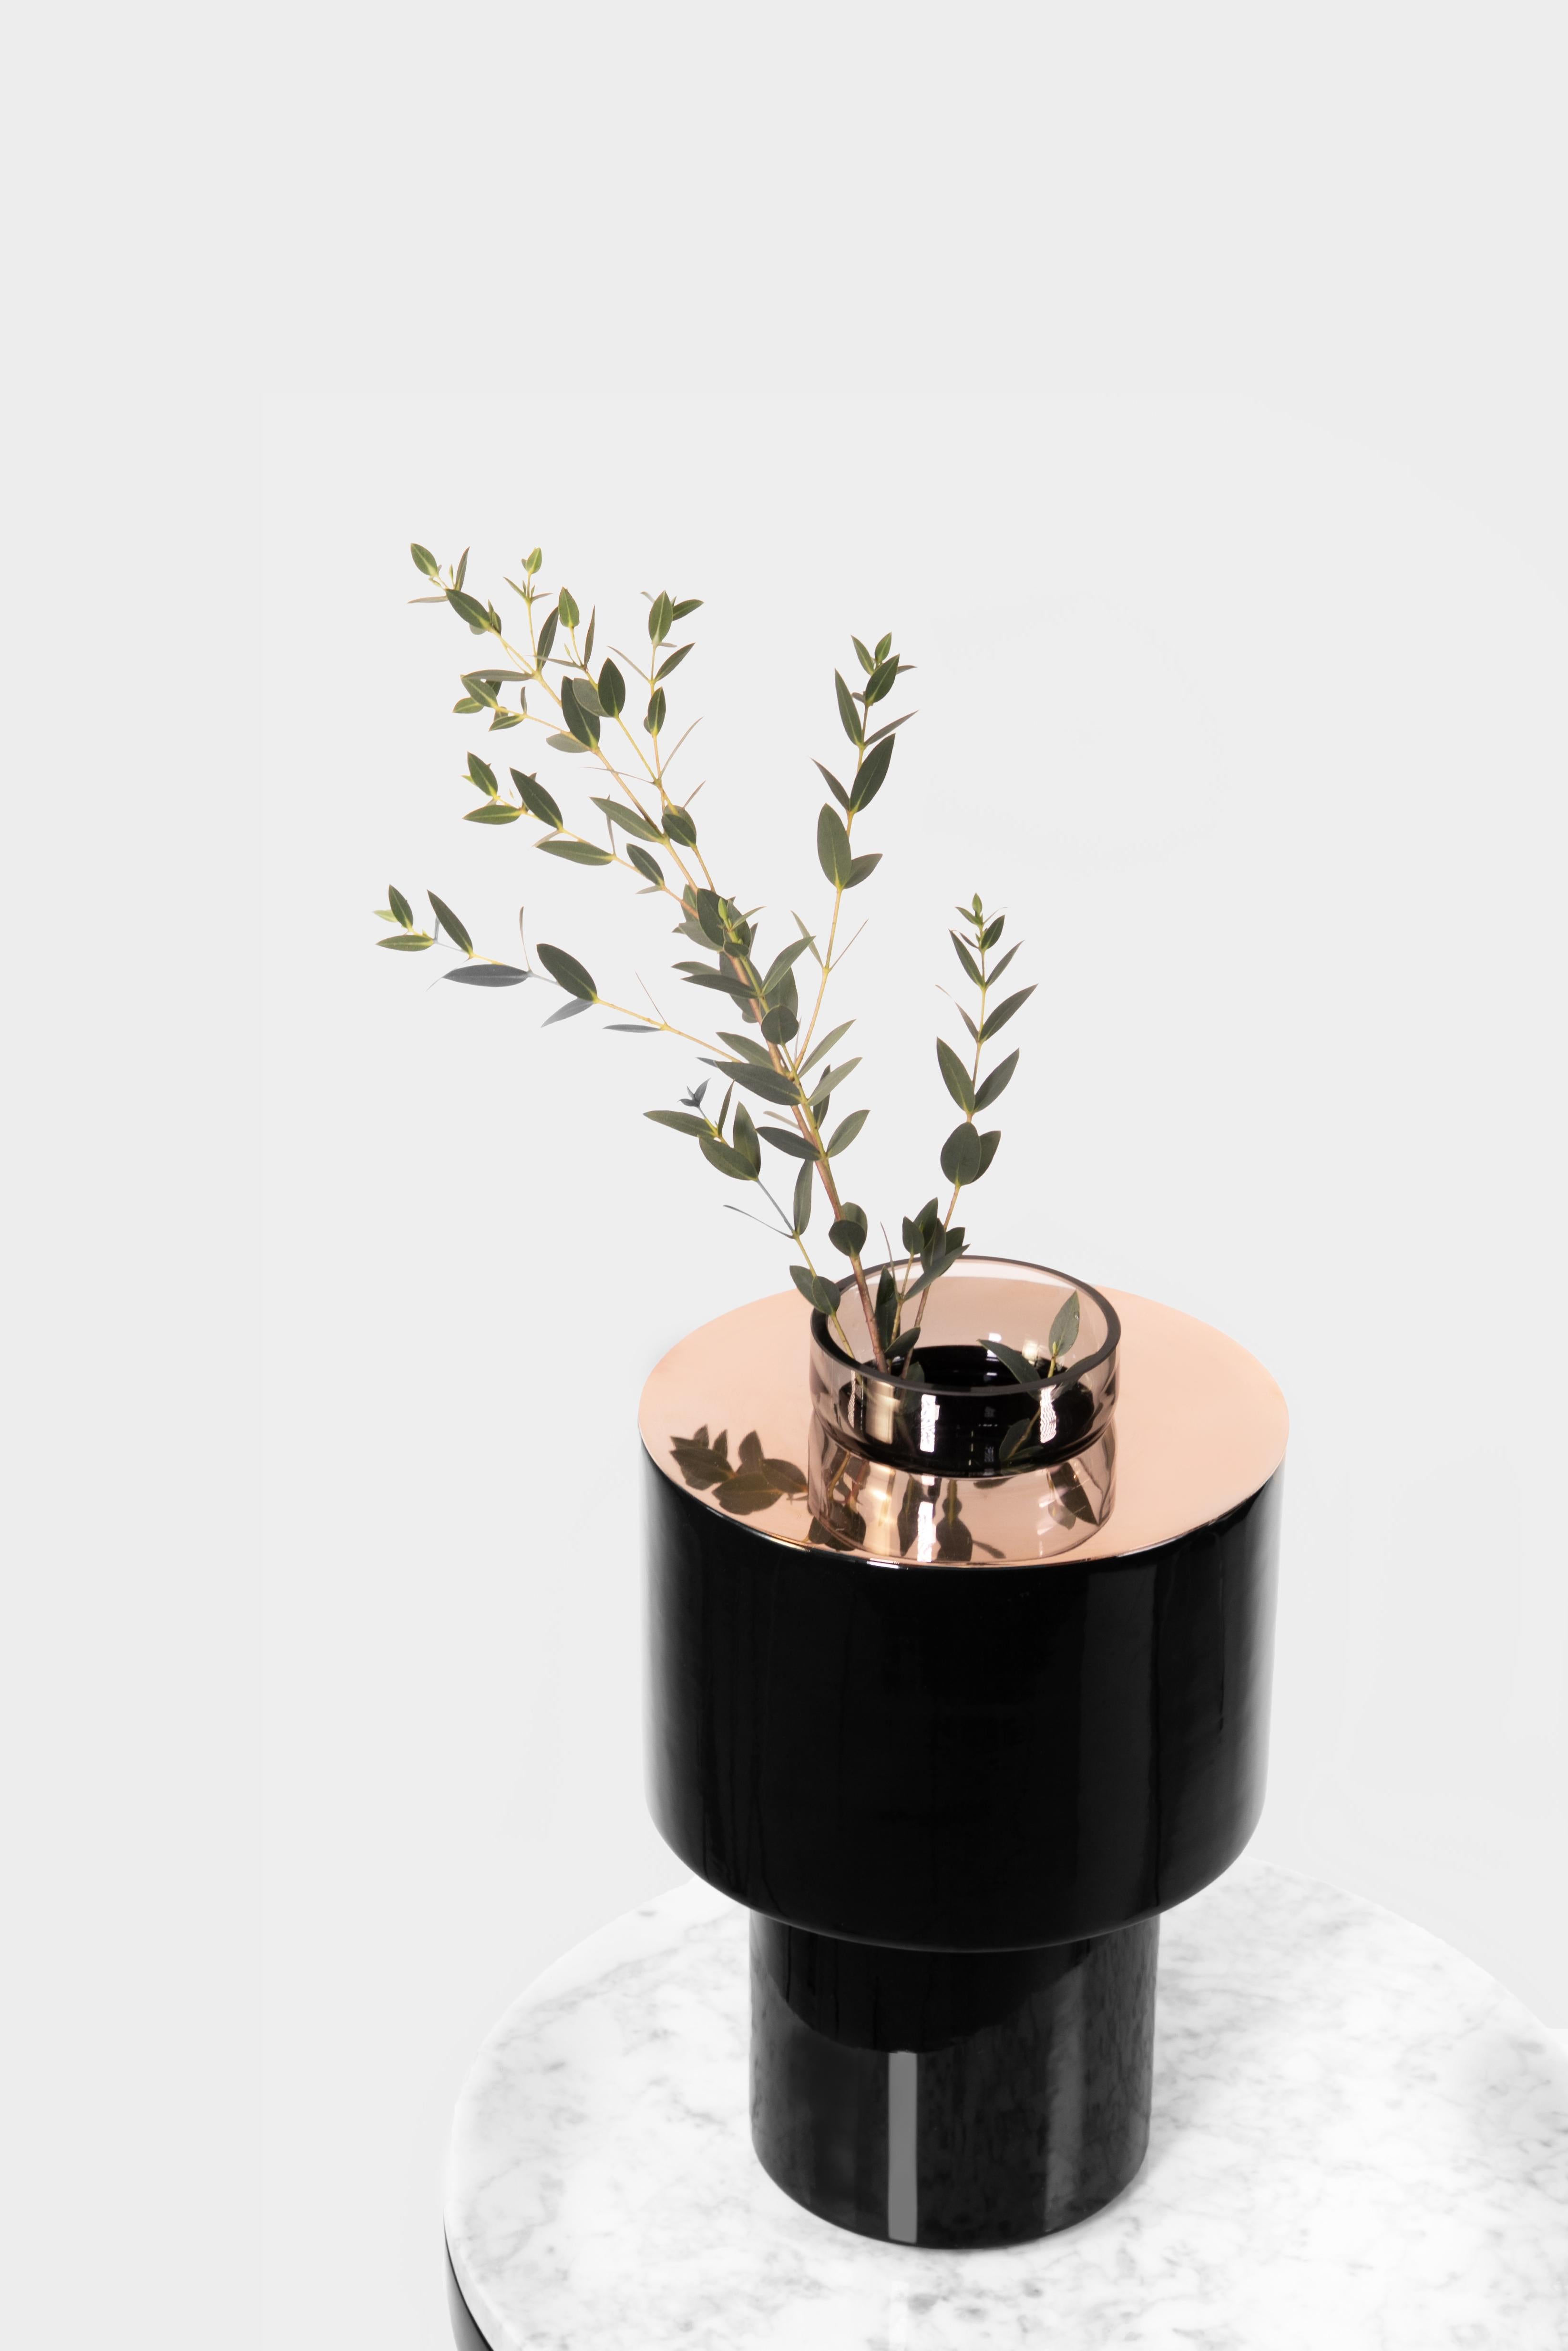 Ceramic and marble vase by Eric Willemart
Materials: Polished copper-plated disc
Black handcrafted ceramic
Dimensions: D 24 x H 28 cm

The container is made of grey blown glass and slides into the ceramic body. You can easily remove it to fill it